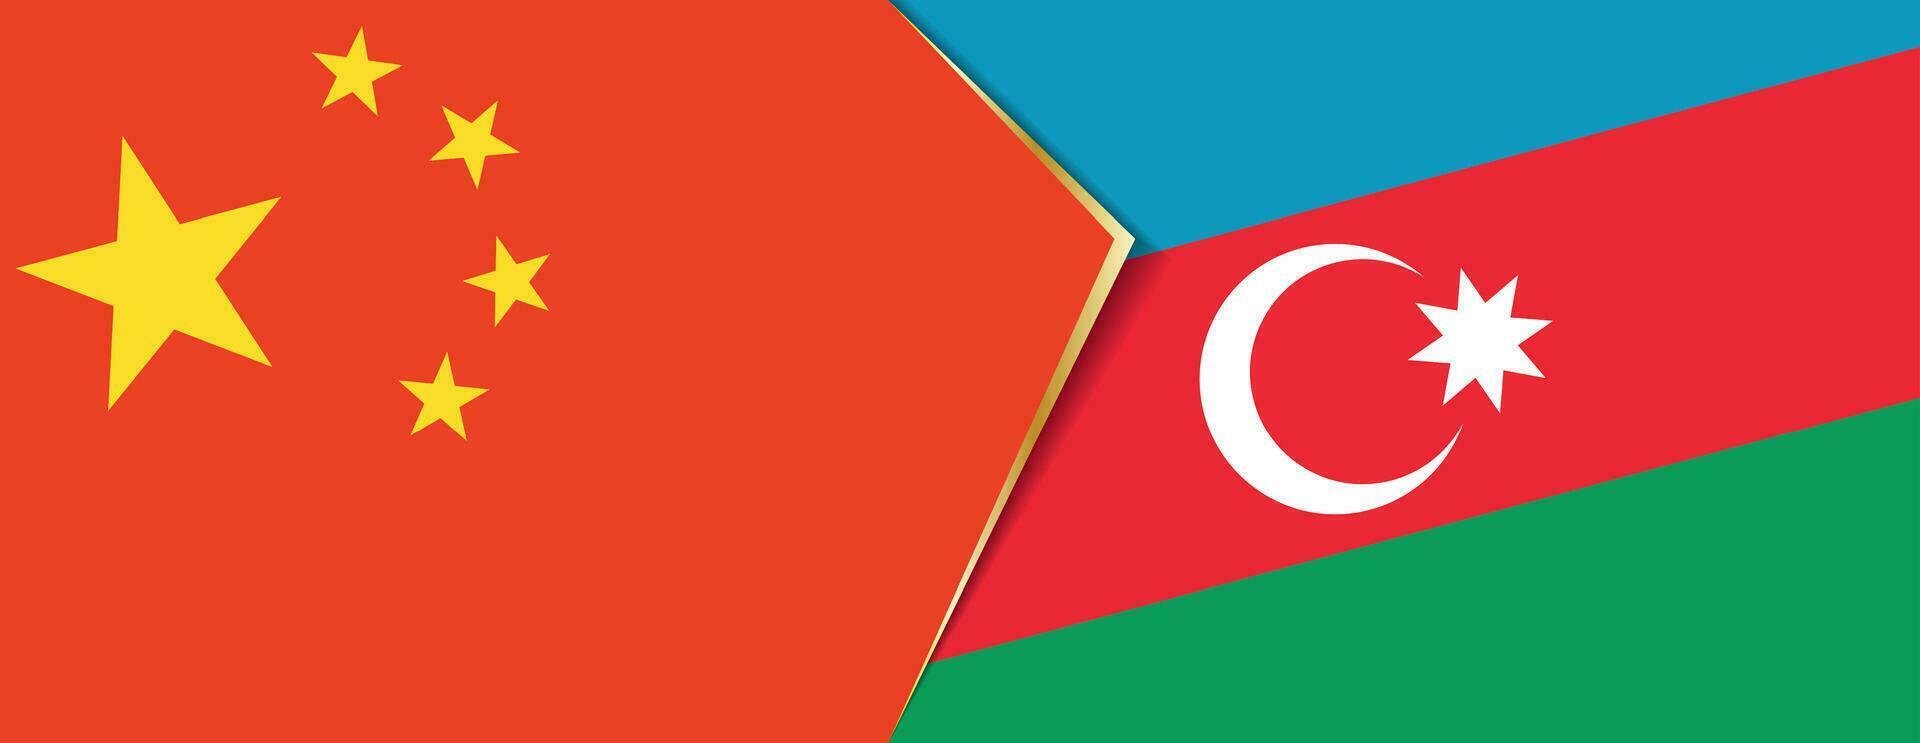 China and Azerbaijan flags, two vector flags.